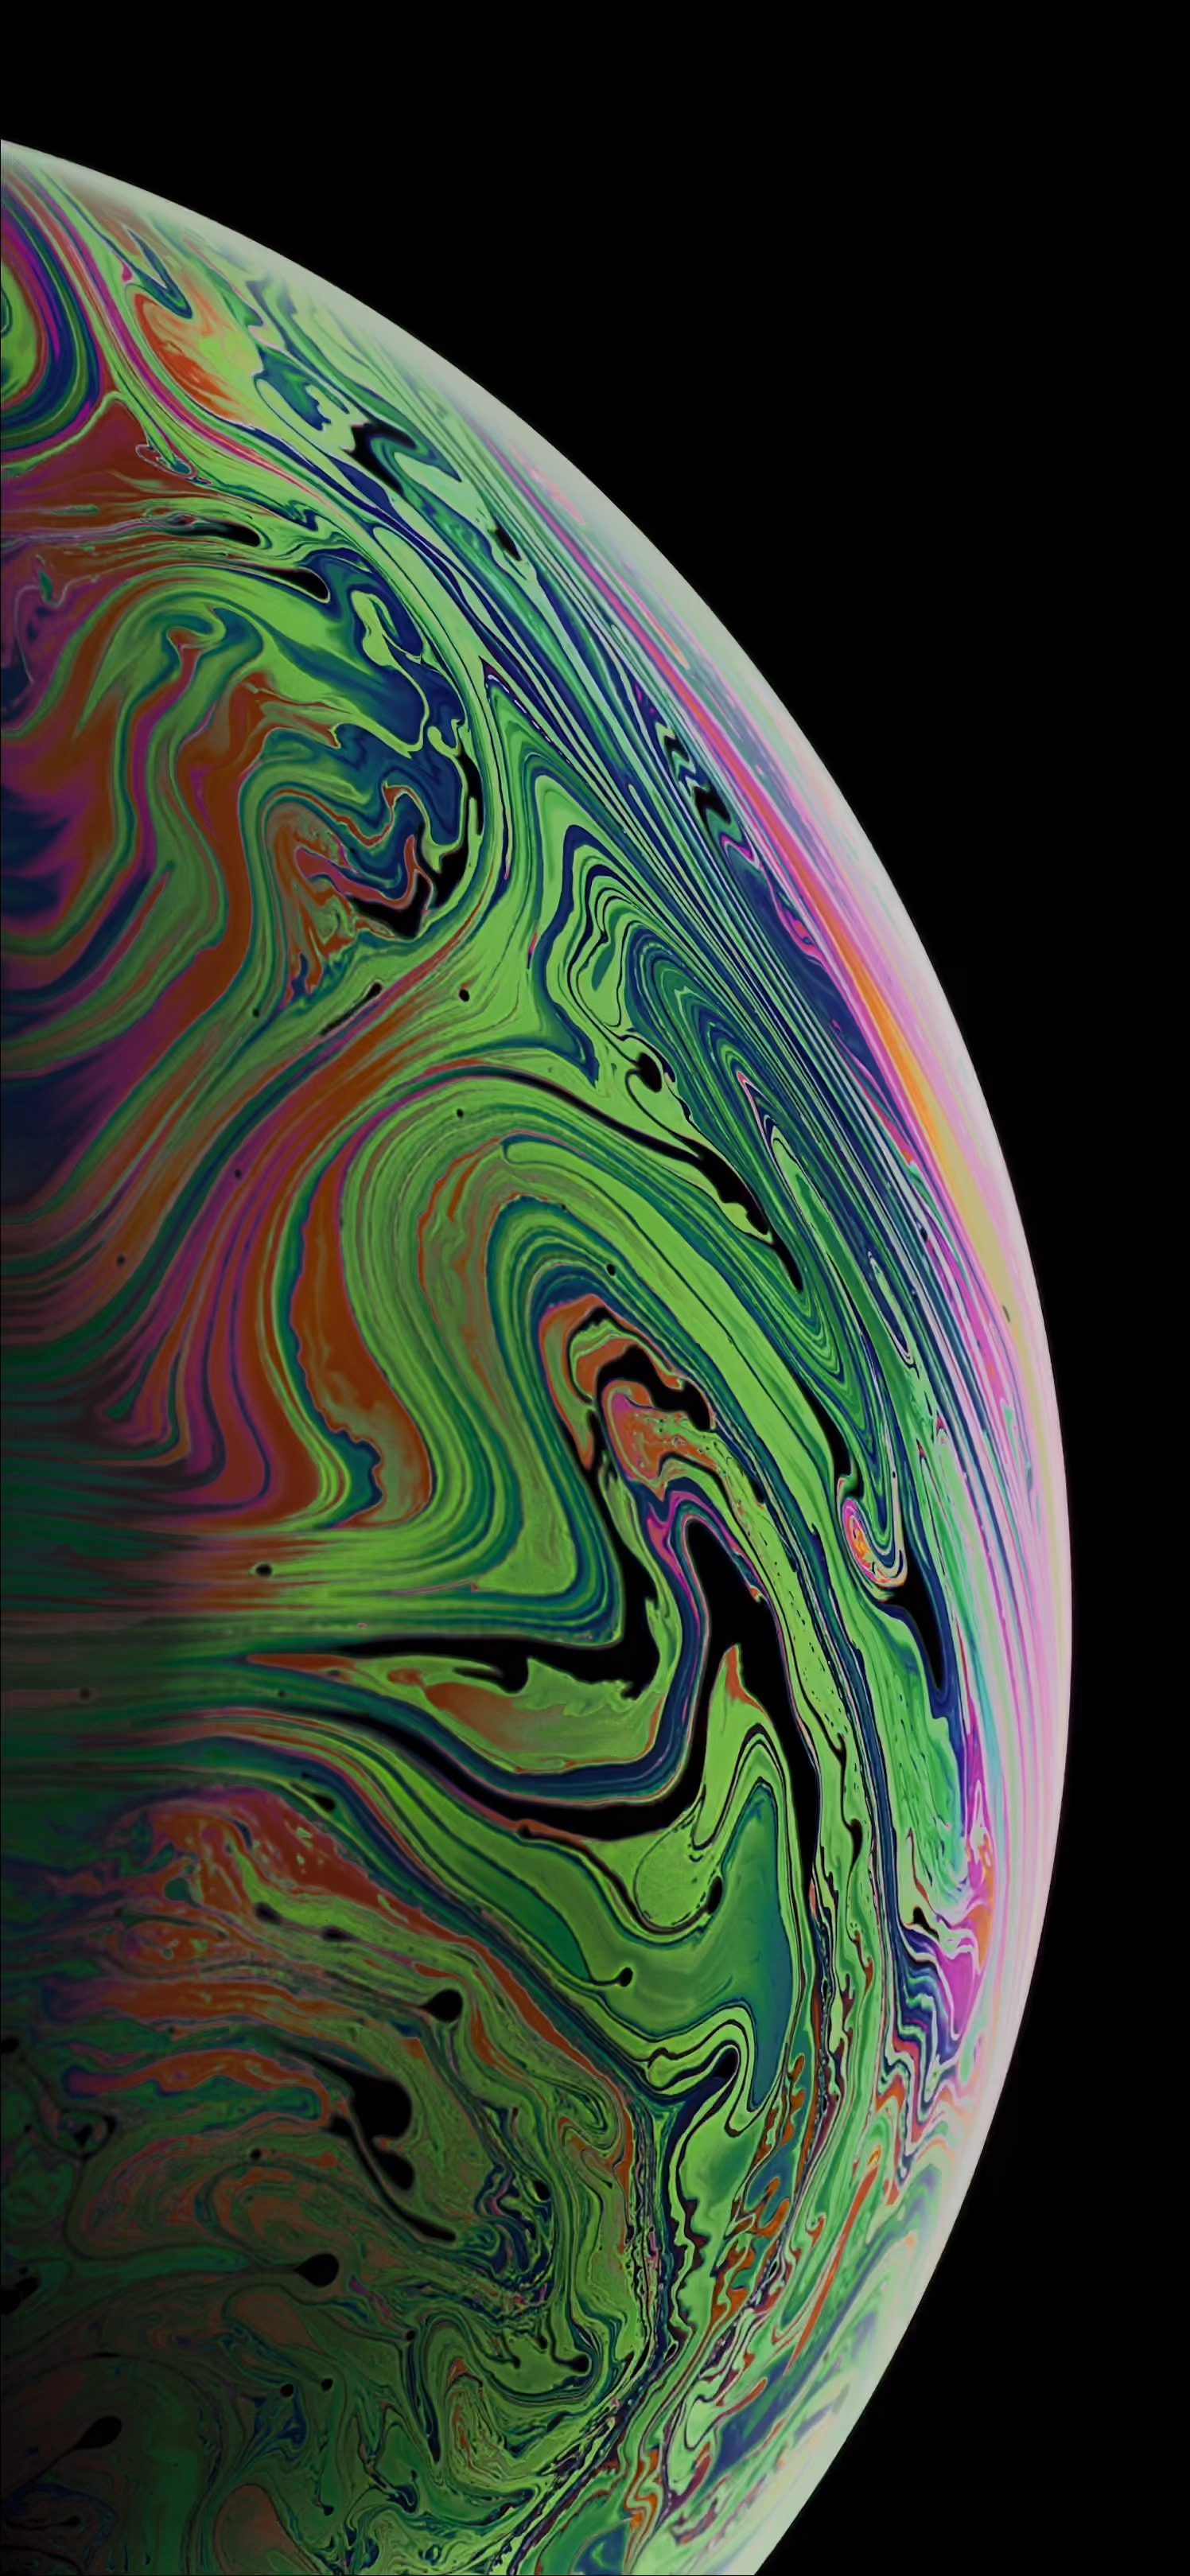 Download iPhone XS and iPhone XR Stock Wallpapers (28 